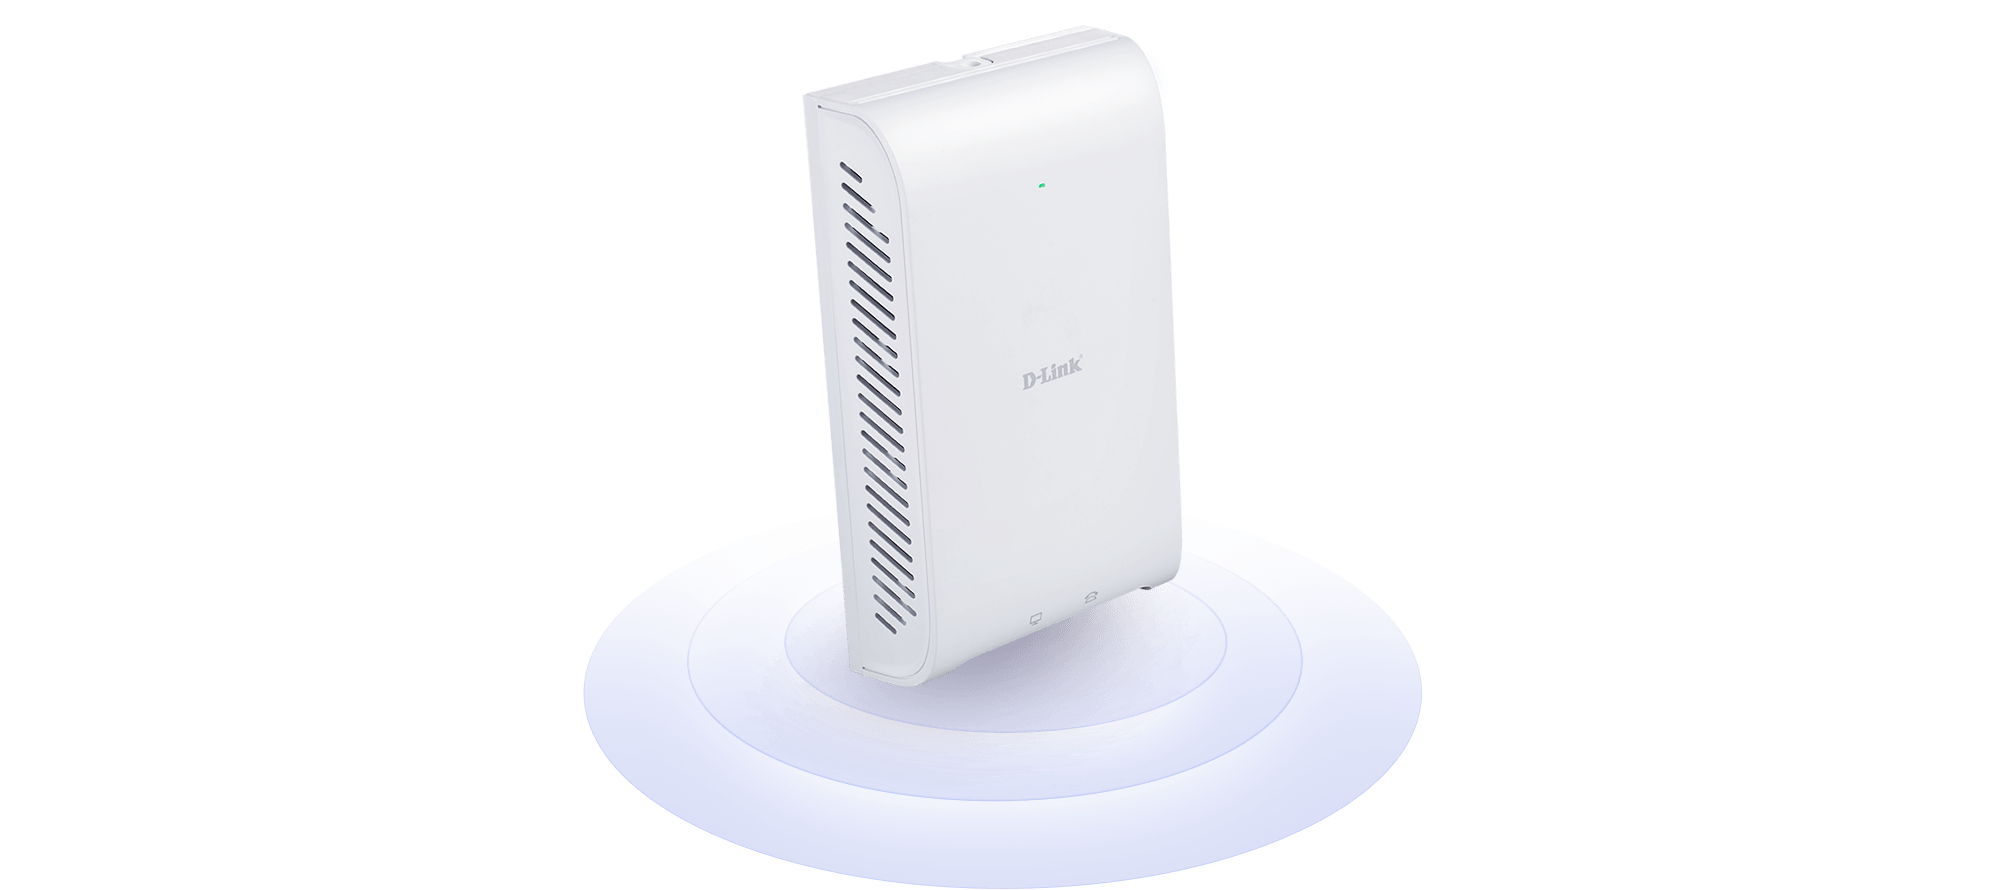 DAP-2620 Wireless AC1200 Wave 2 In-Wall PoE Access Point with waves emanating from it